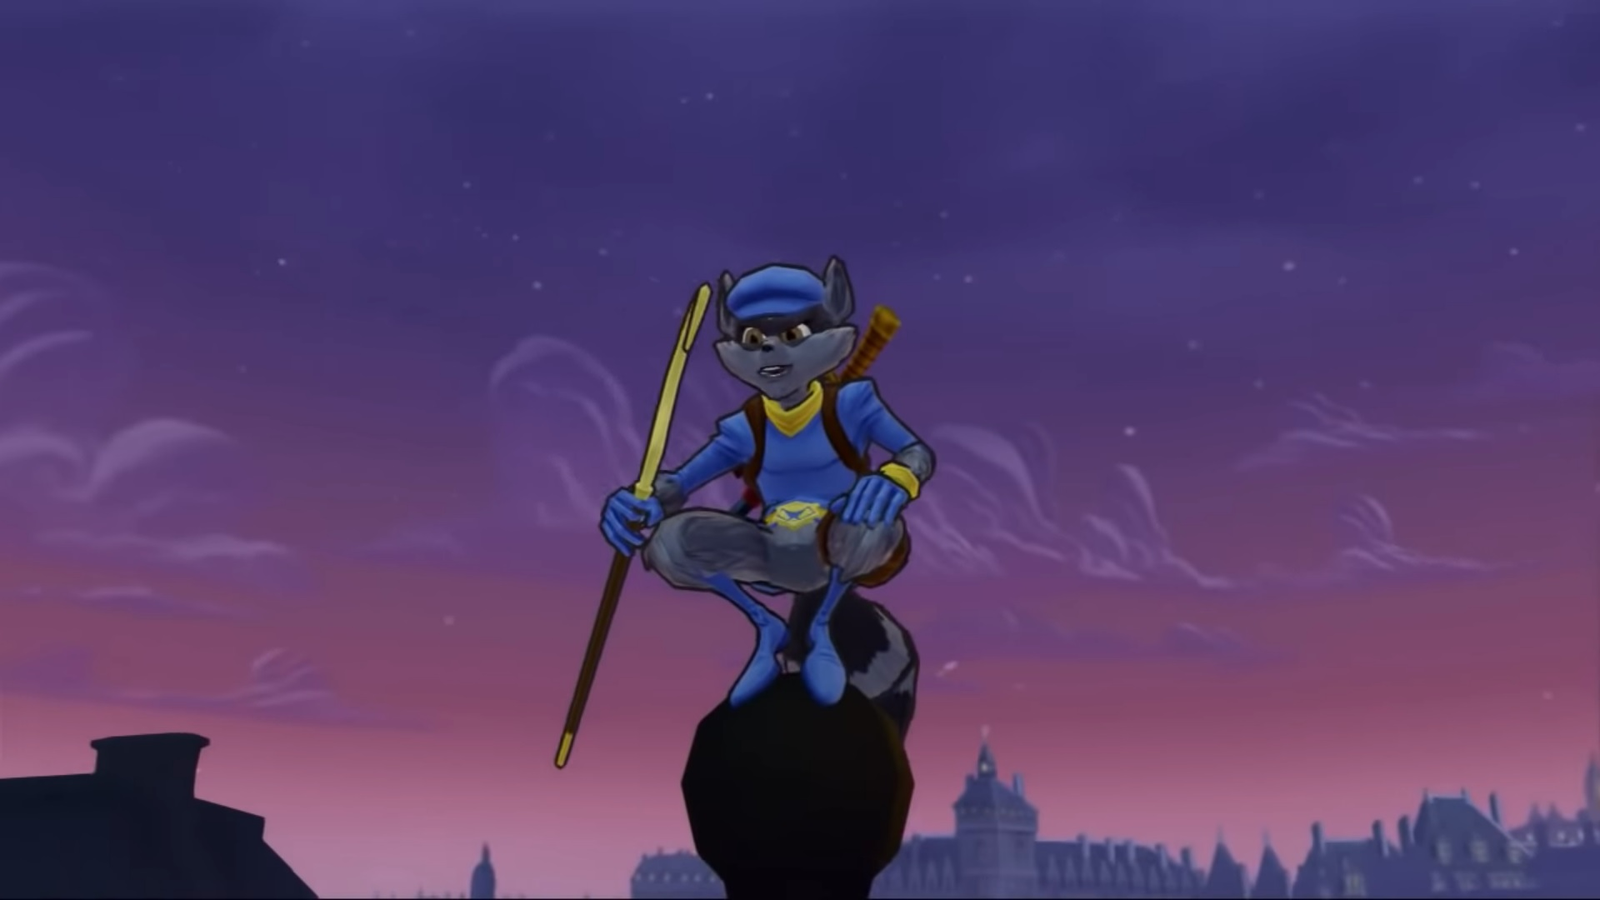 Sucker Punch breaks the bad news to Sly Cooper and Infamous fans